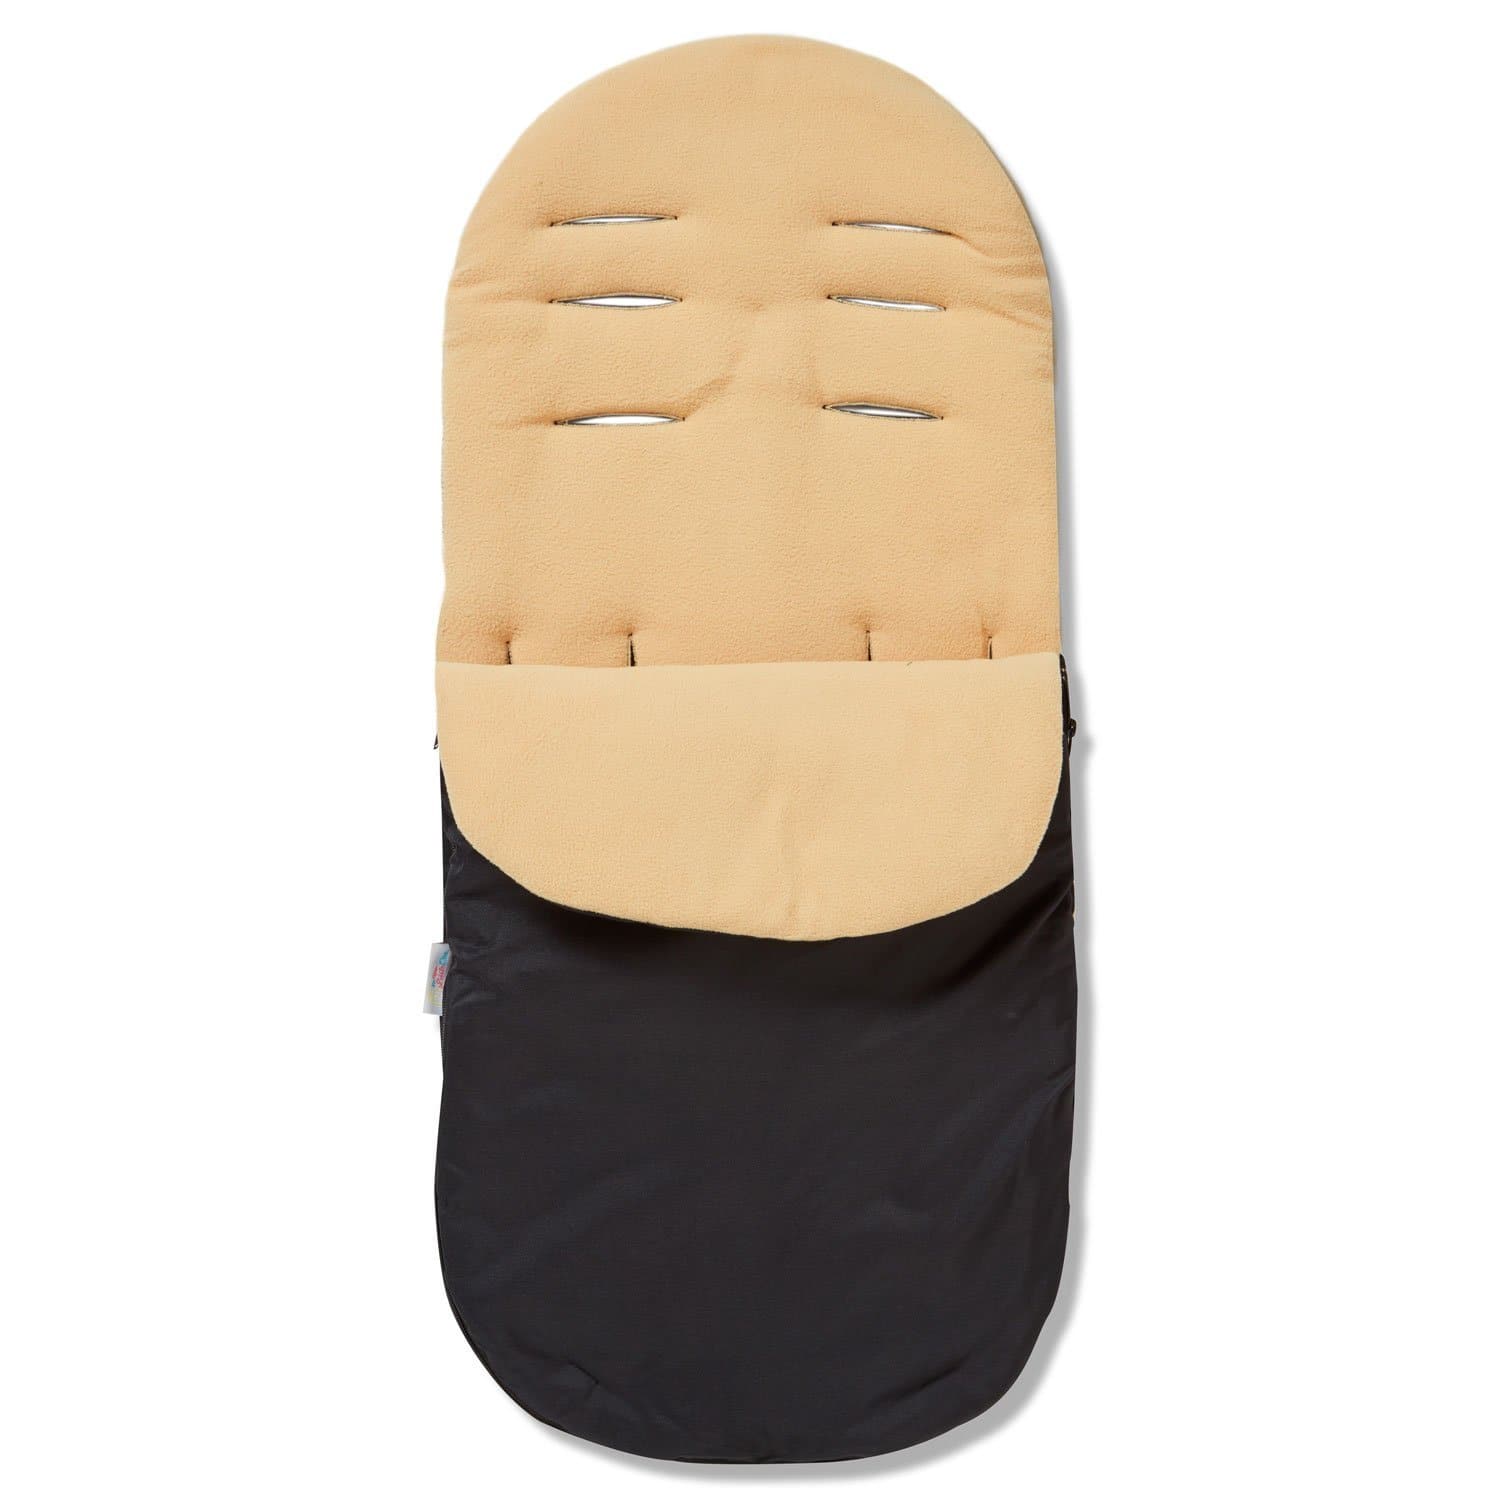 Footmuff / Cosy Toes Compatible with Little Shield - Sand / Fits All Models | For Your Little One